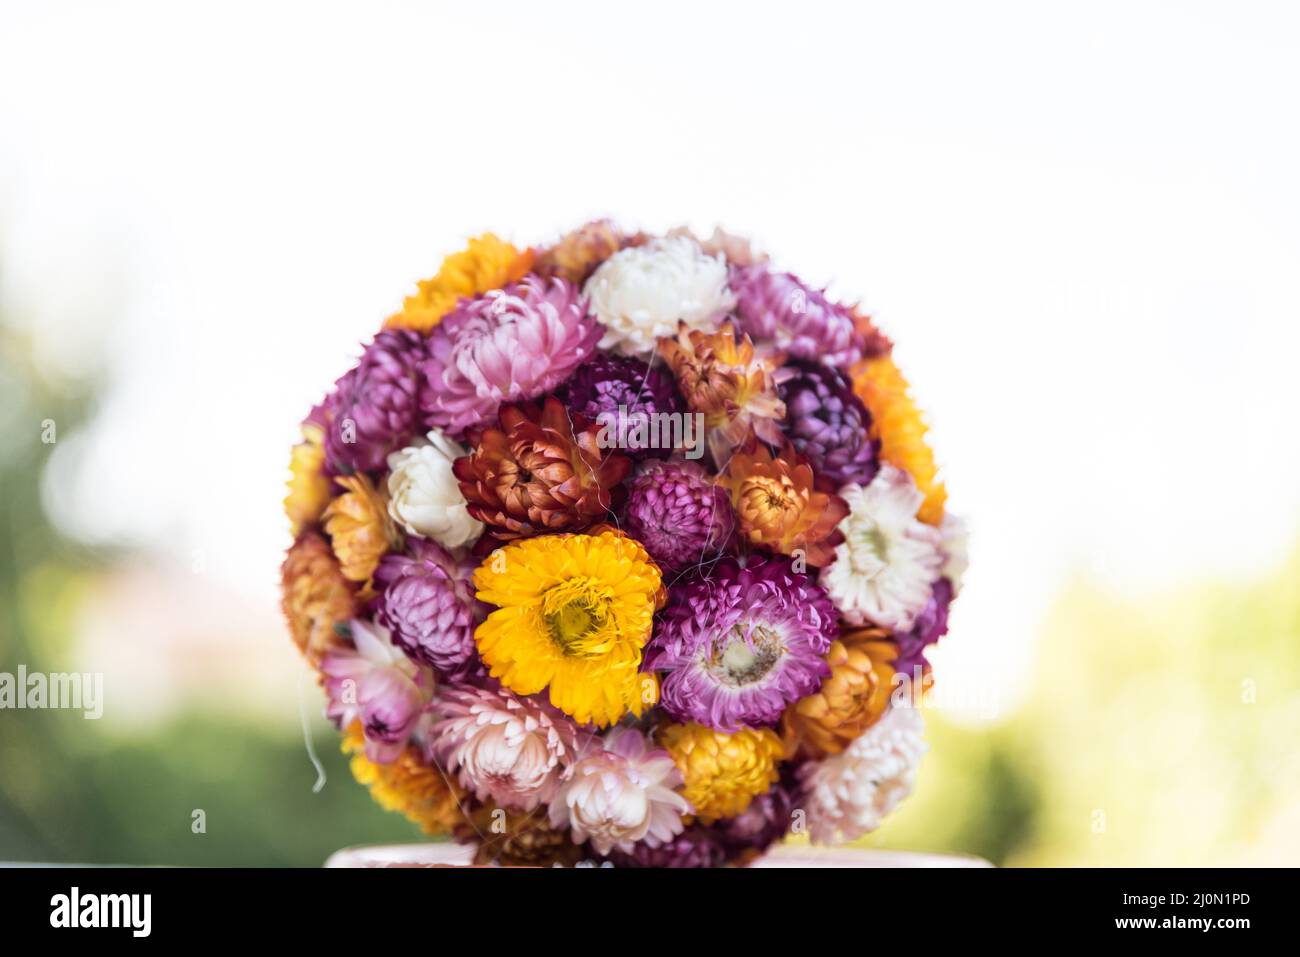 Everlasting flowers - a colorful ball of dried flowers Stock Photo